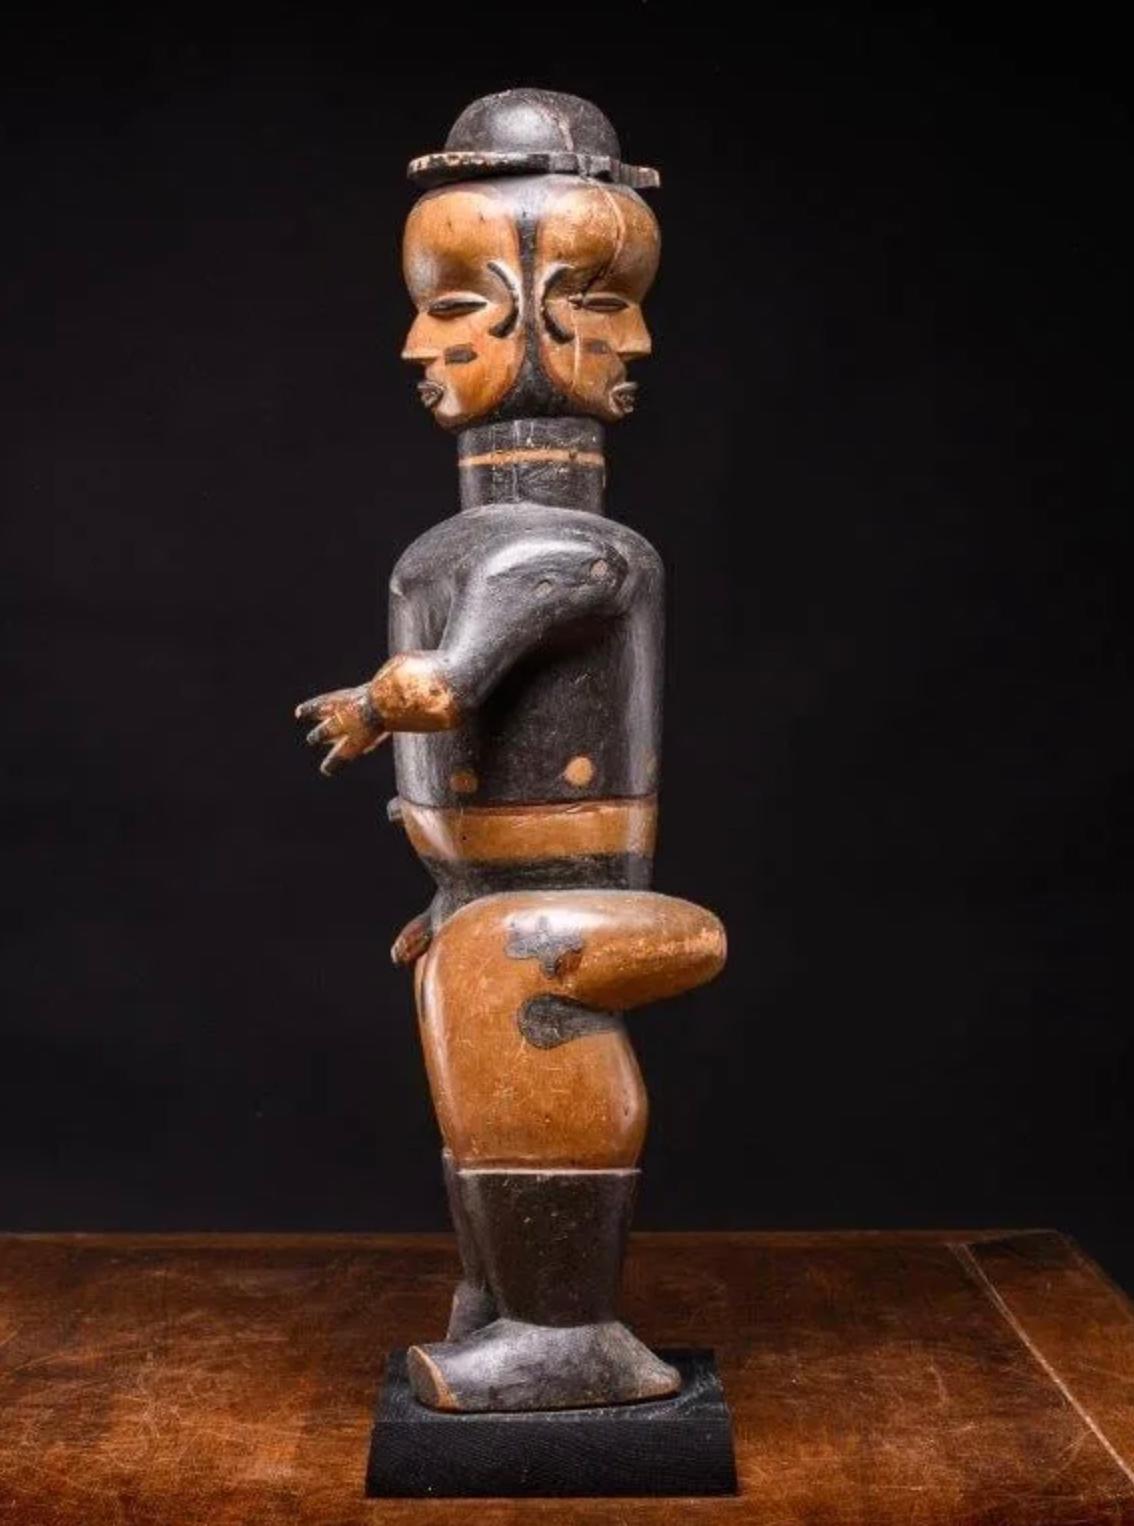 This elaborate Janus statue is a rare example of an Ibibio free-standing figure to recall a well-defined ancestor in what seems a European outfit .The Ibibios lend supernatural powers to these statues which are also used during divination